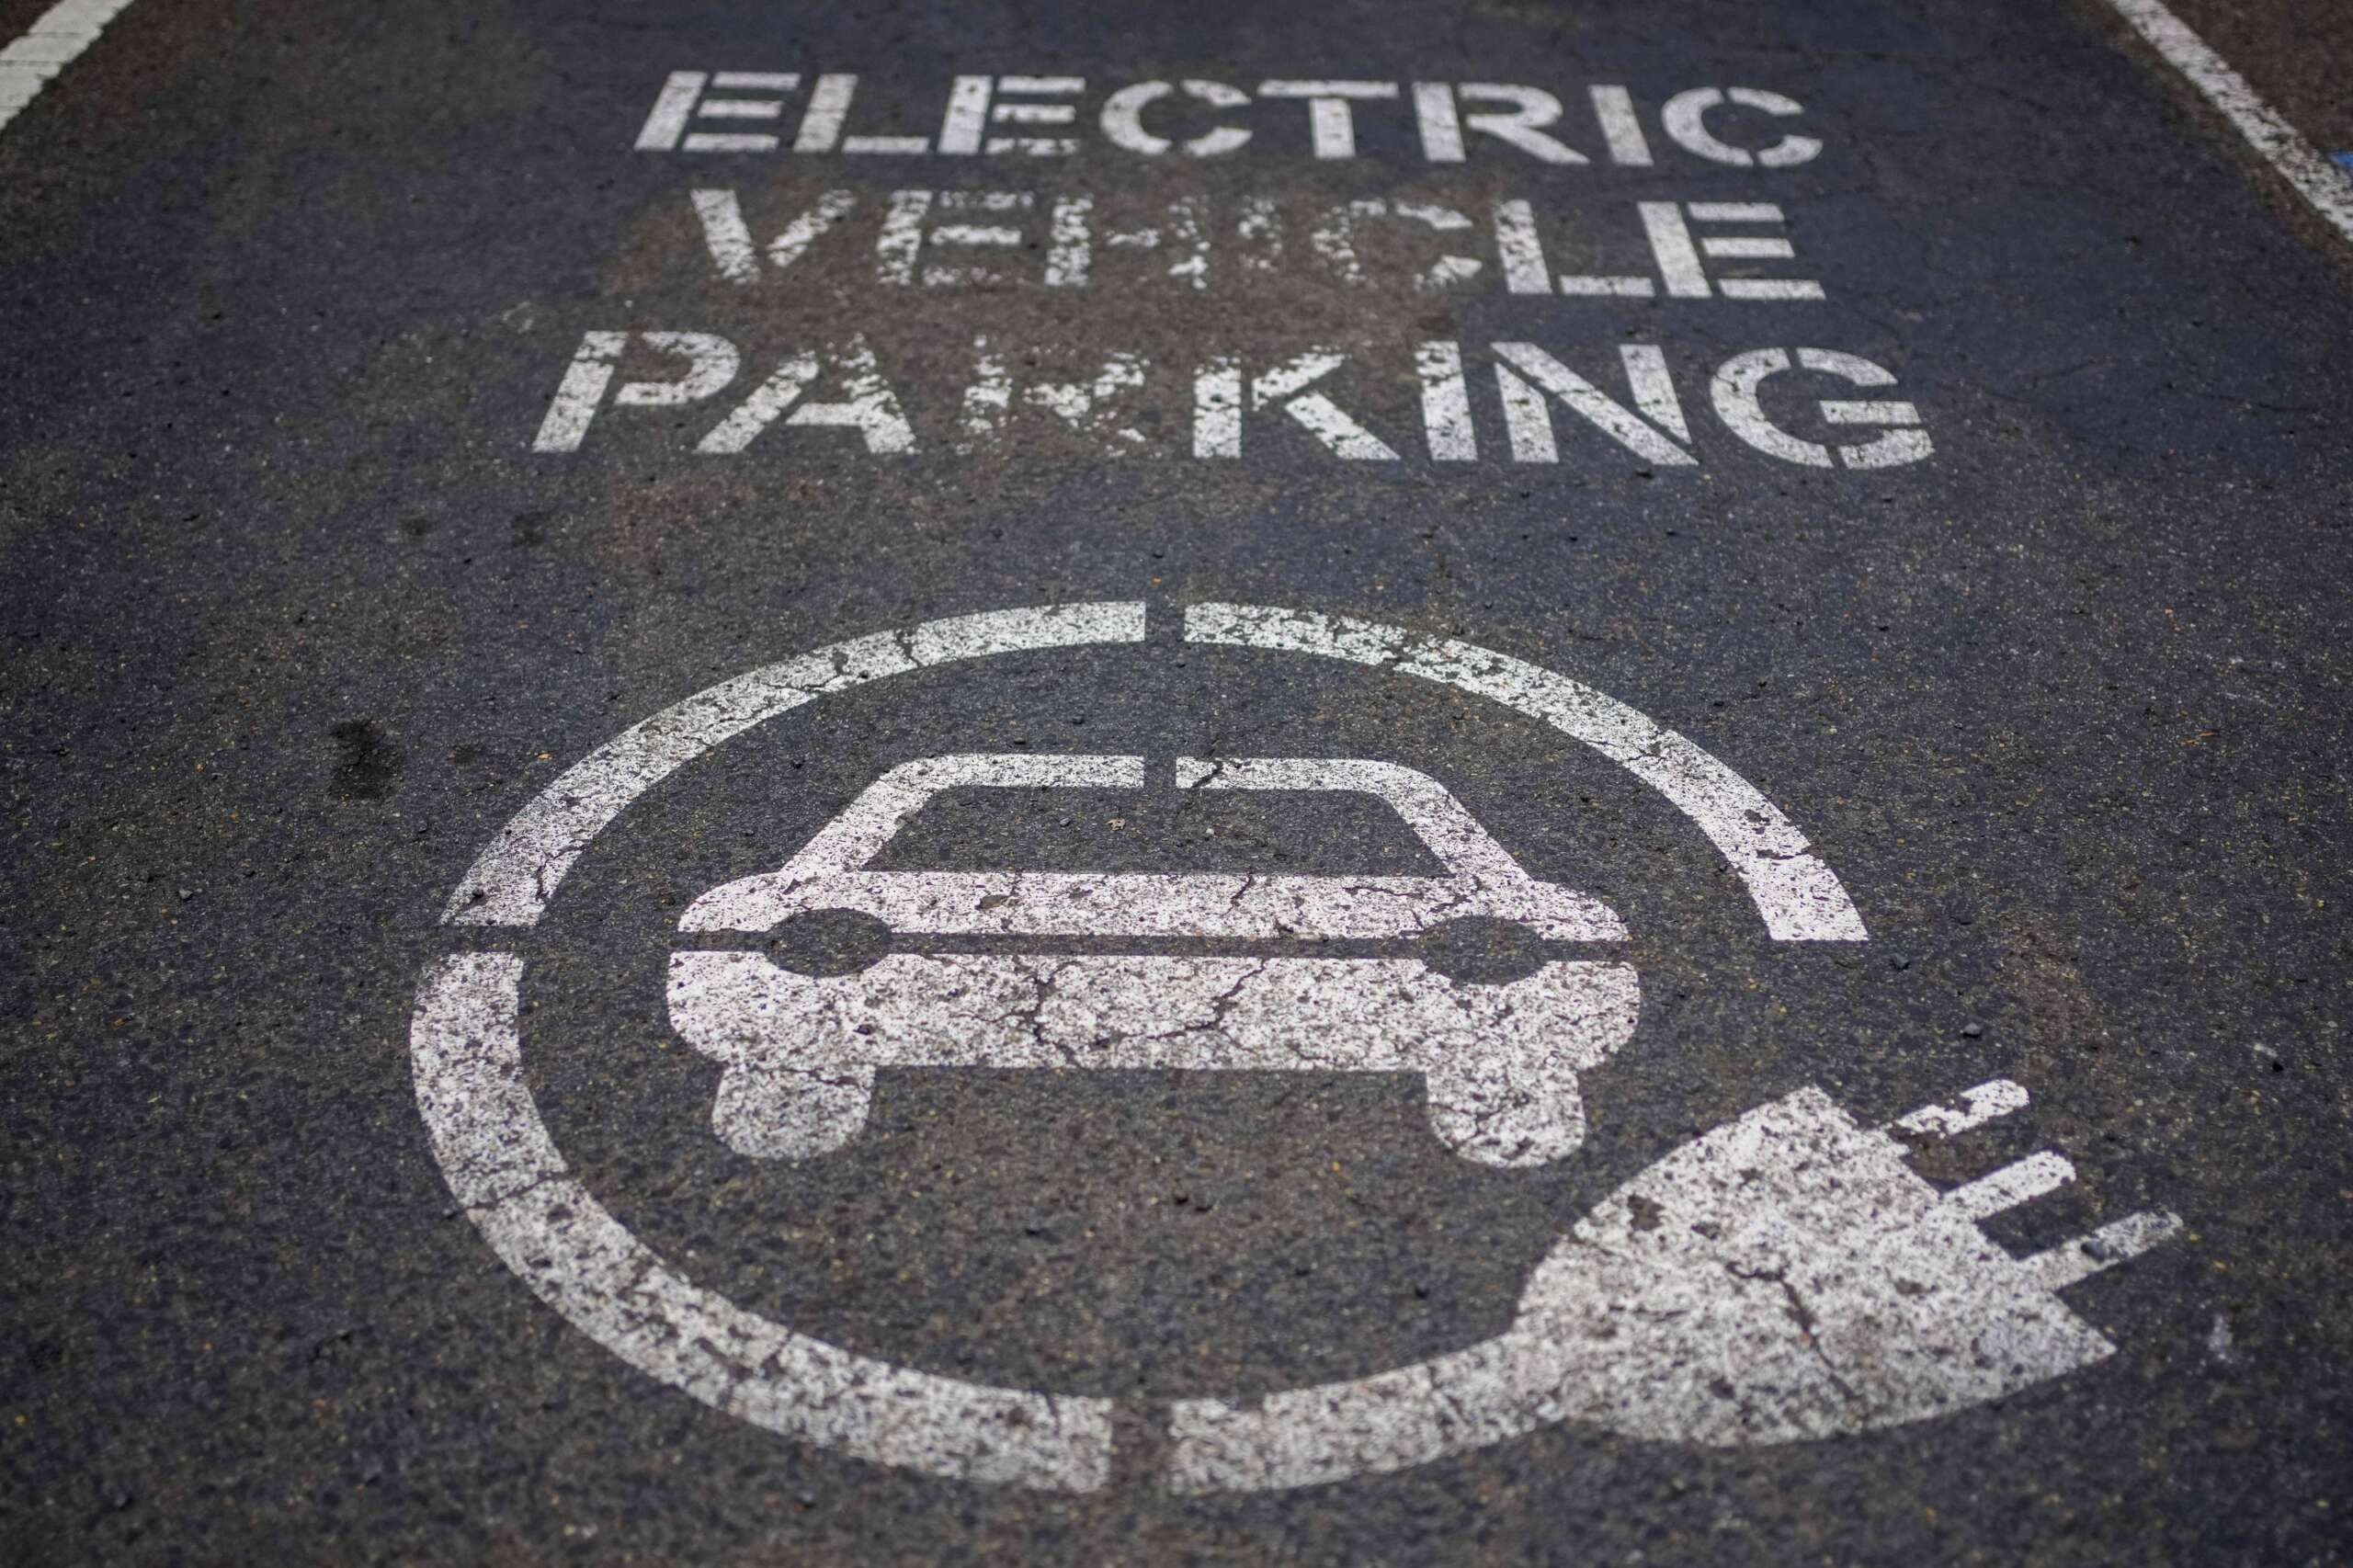 Electric Vehicle Suitability Assessment - EVSA